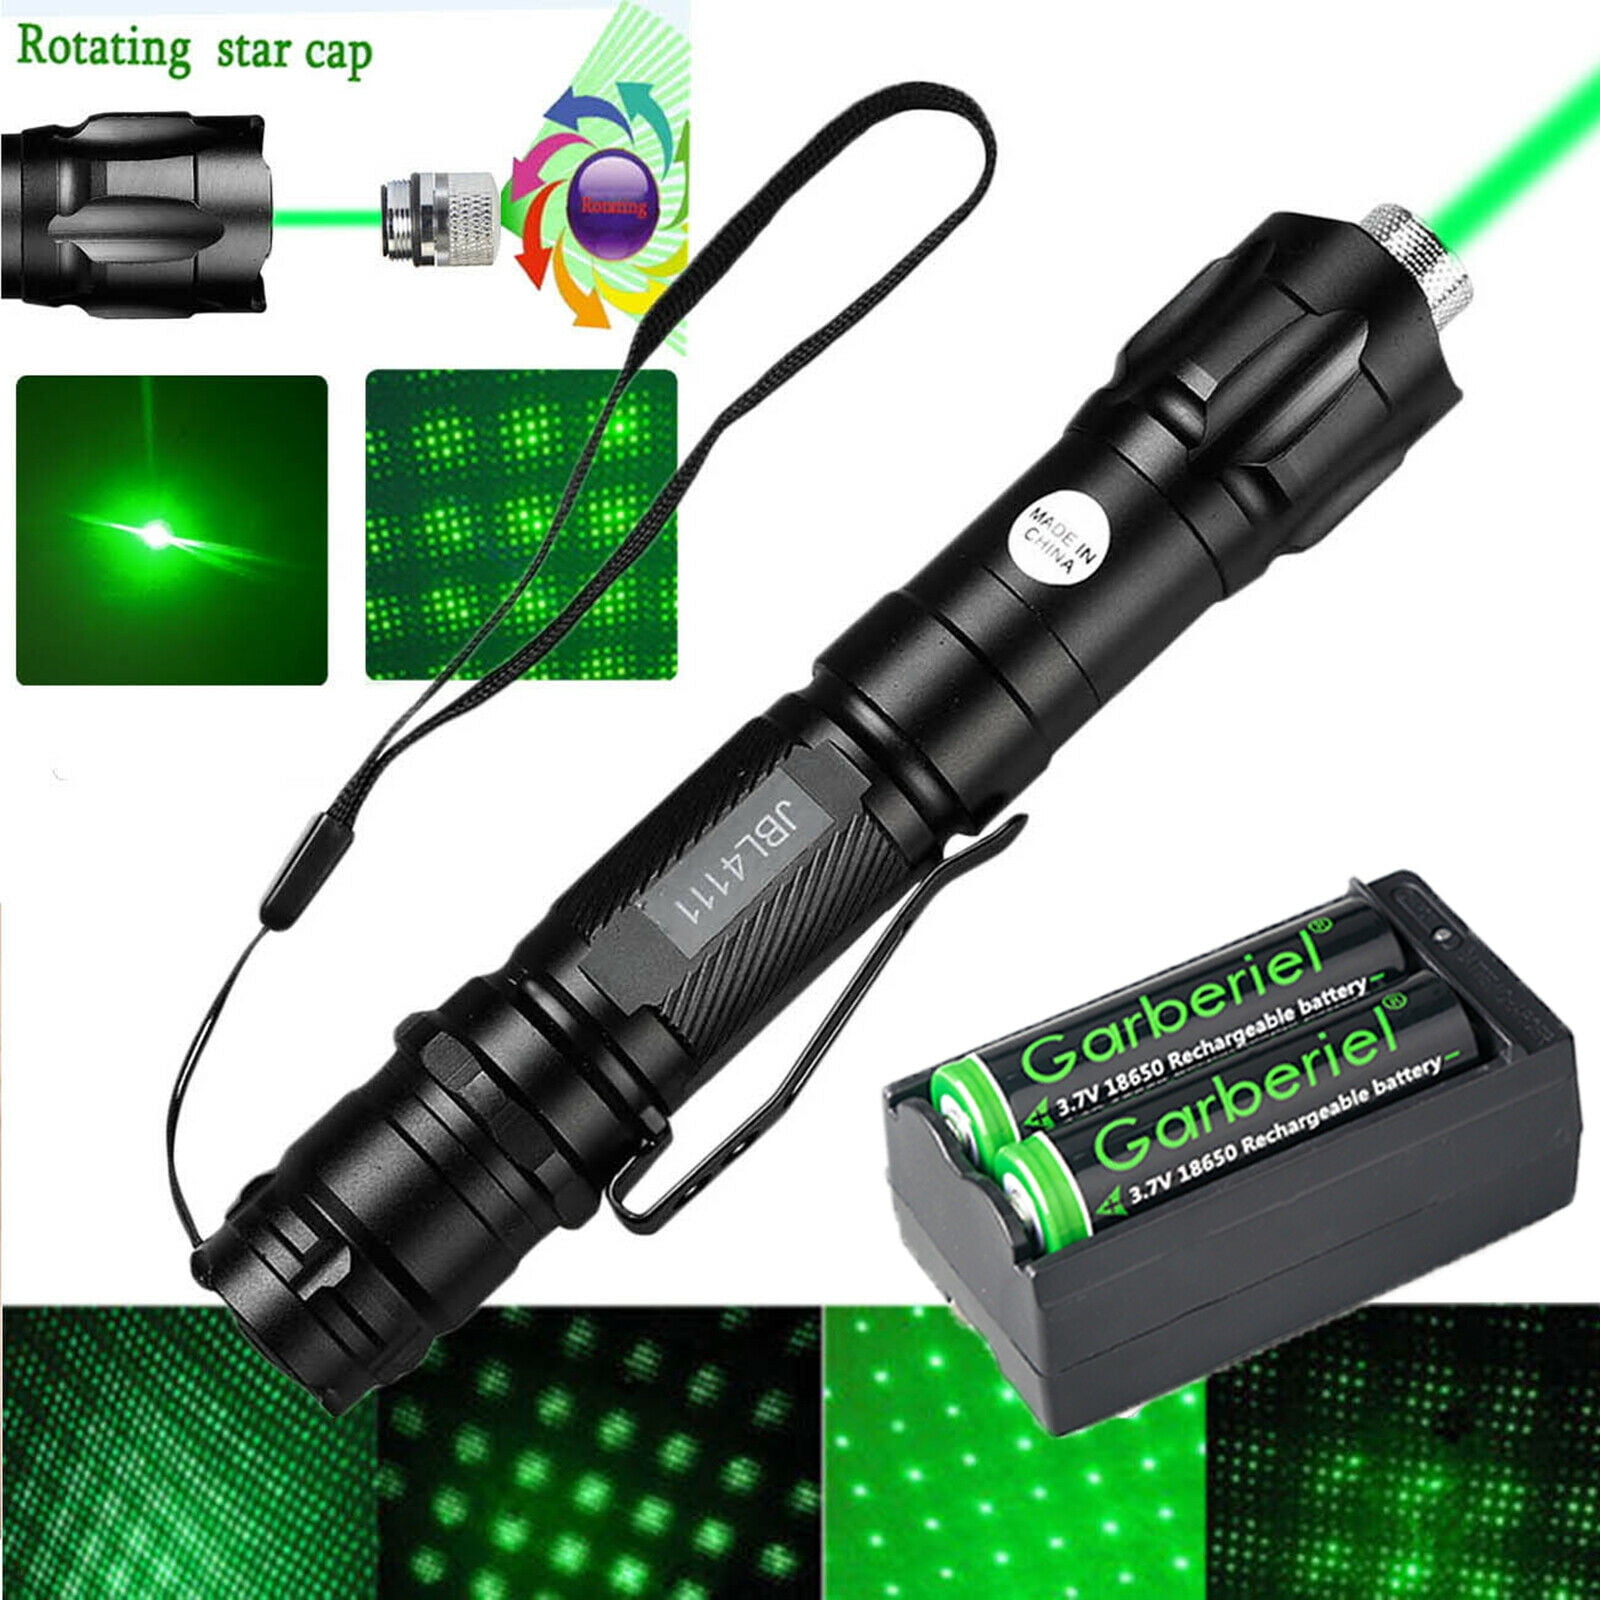 High Power 532nm Green Laser Pointer Pen Visible Beam Light Lazer+Battery+Charge 